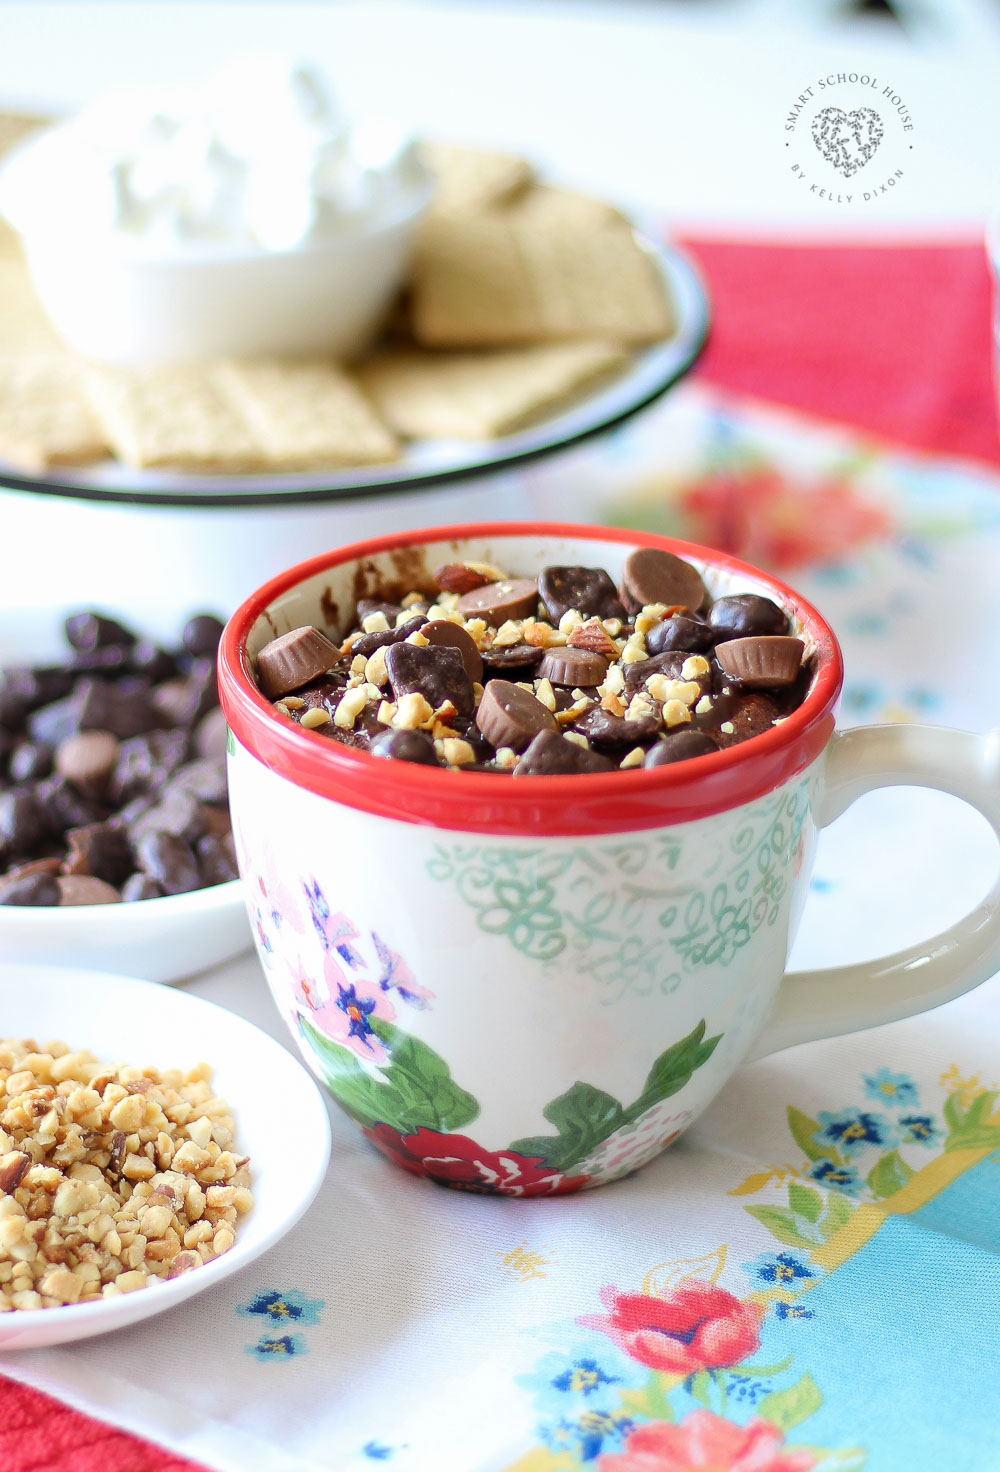 Hot fudge brownie microwave mug treat topped with nuts and peanut butter treats. YUM!